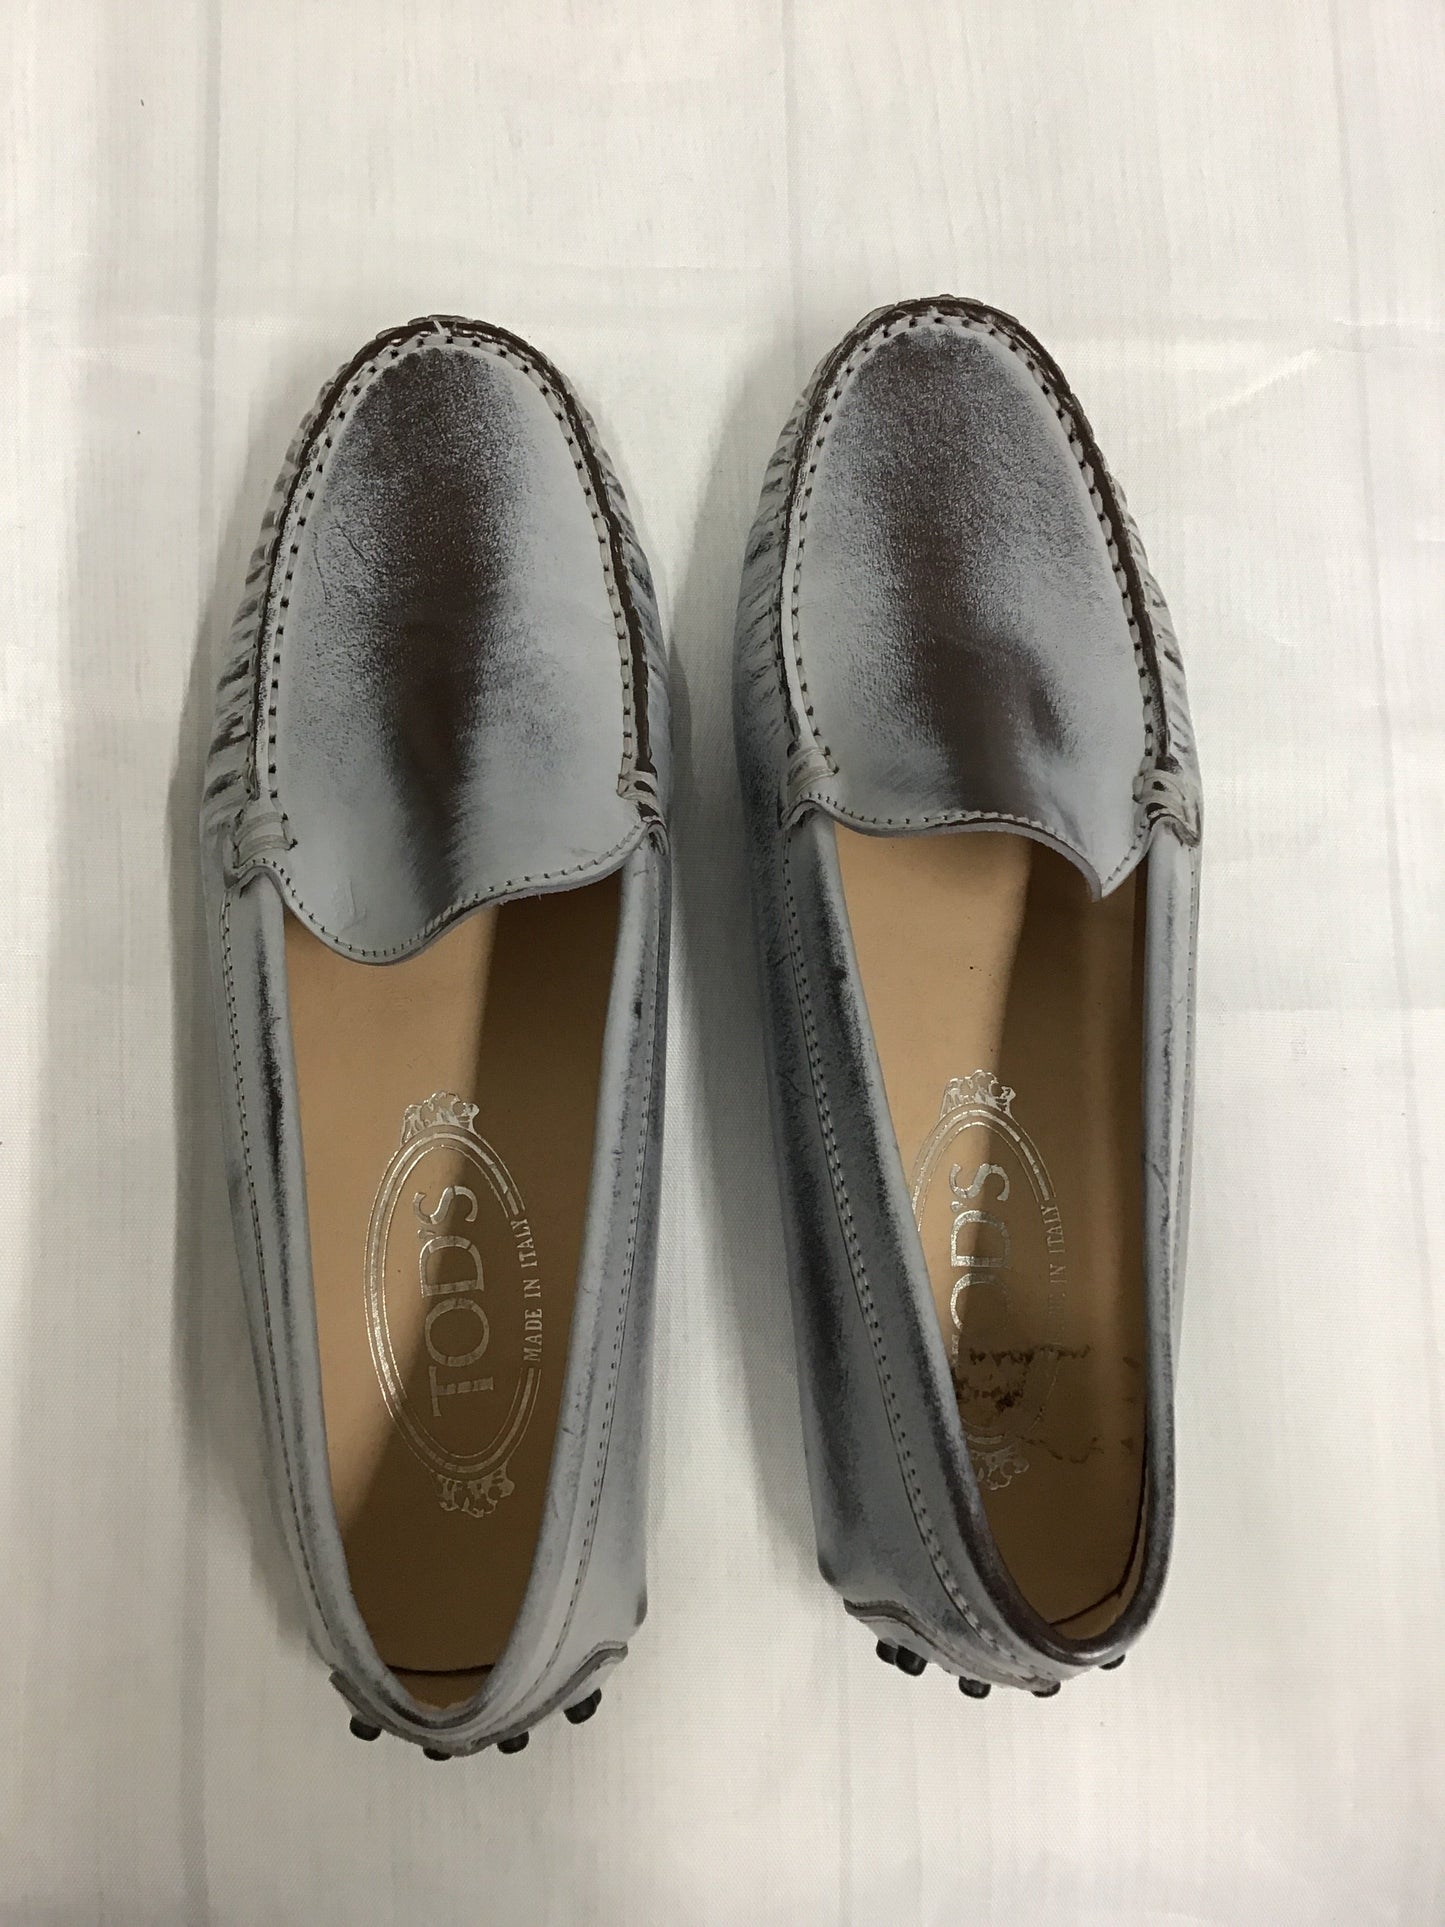 Shoes Flats Moccasin By Tods  Size: 6